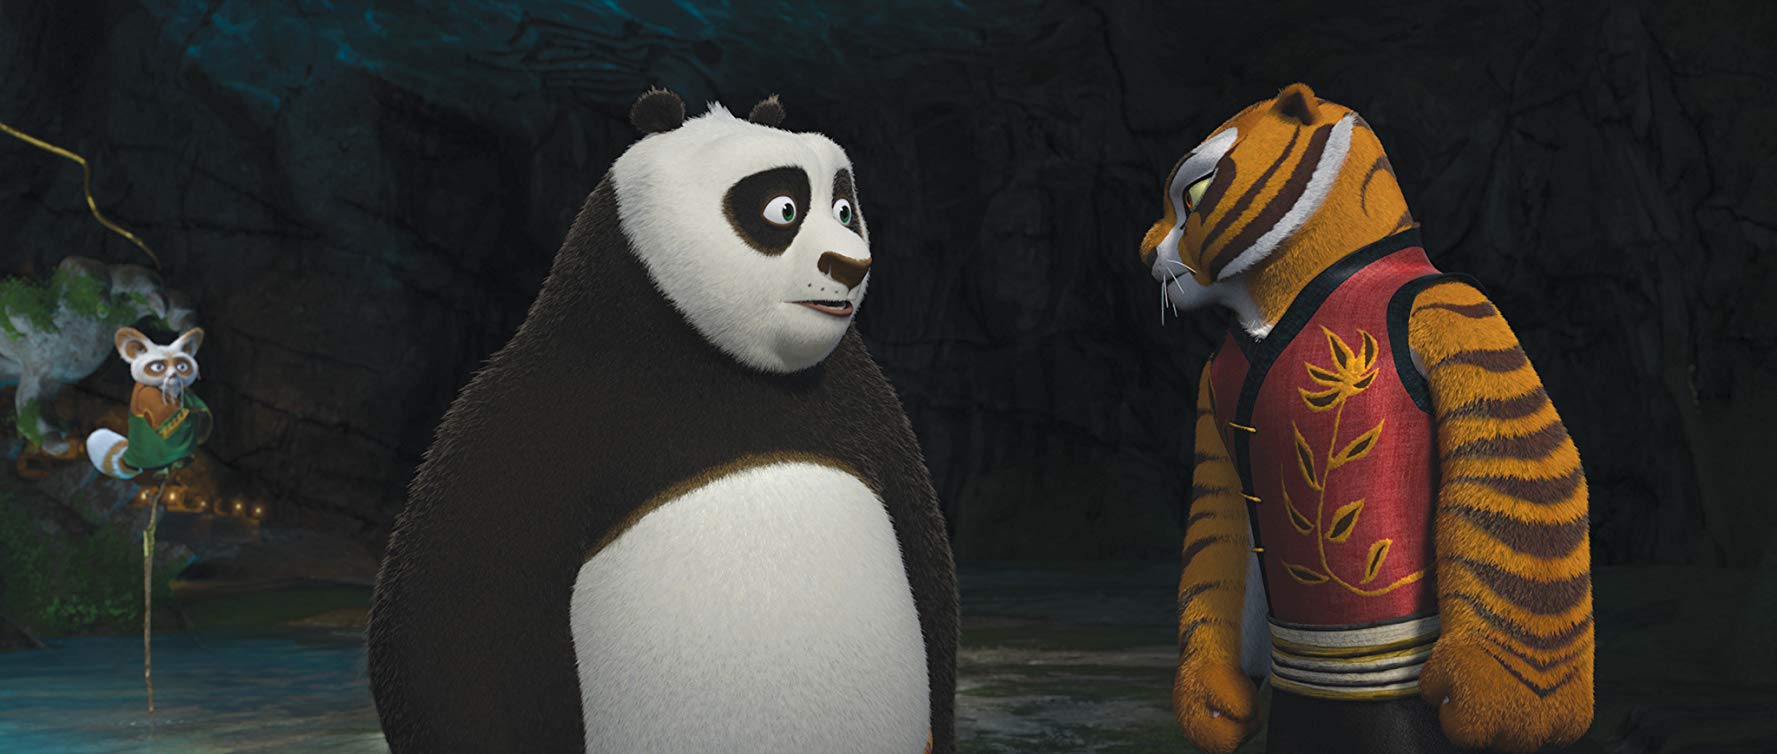 123movies - Kung Fu Panda 2 Watch here for free